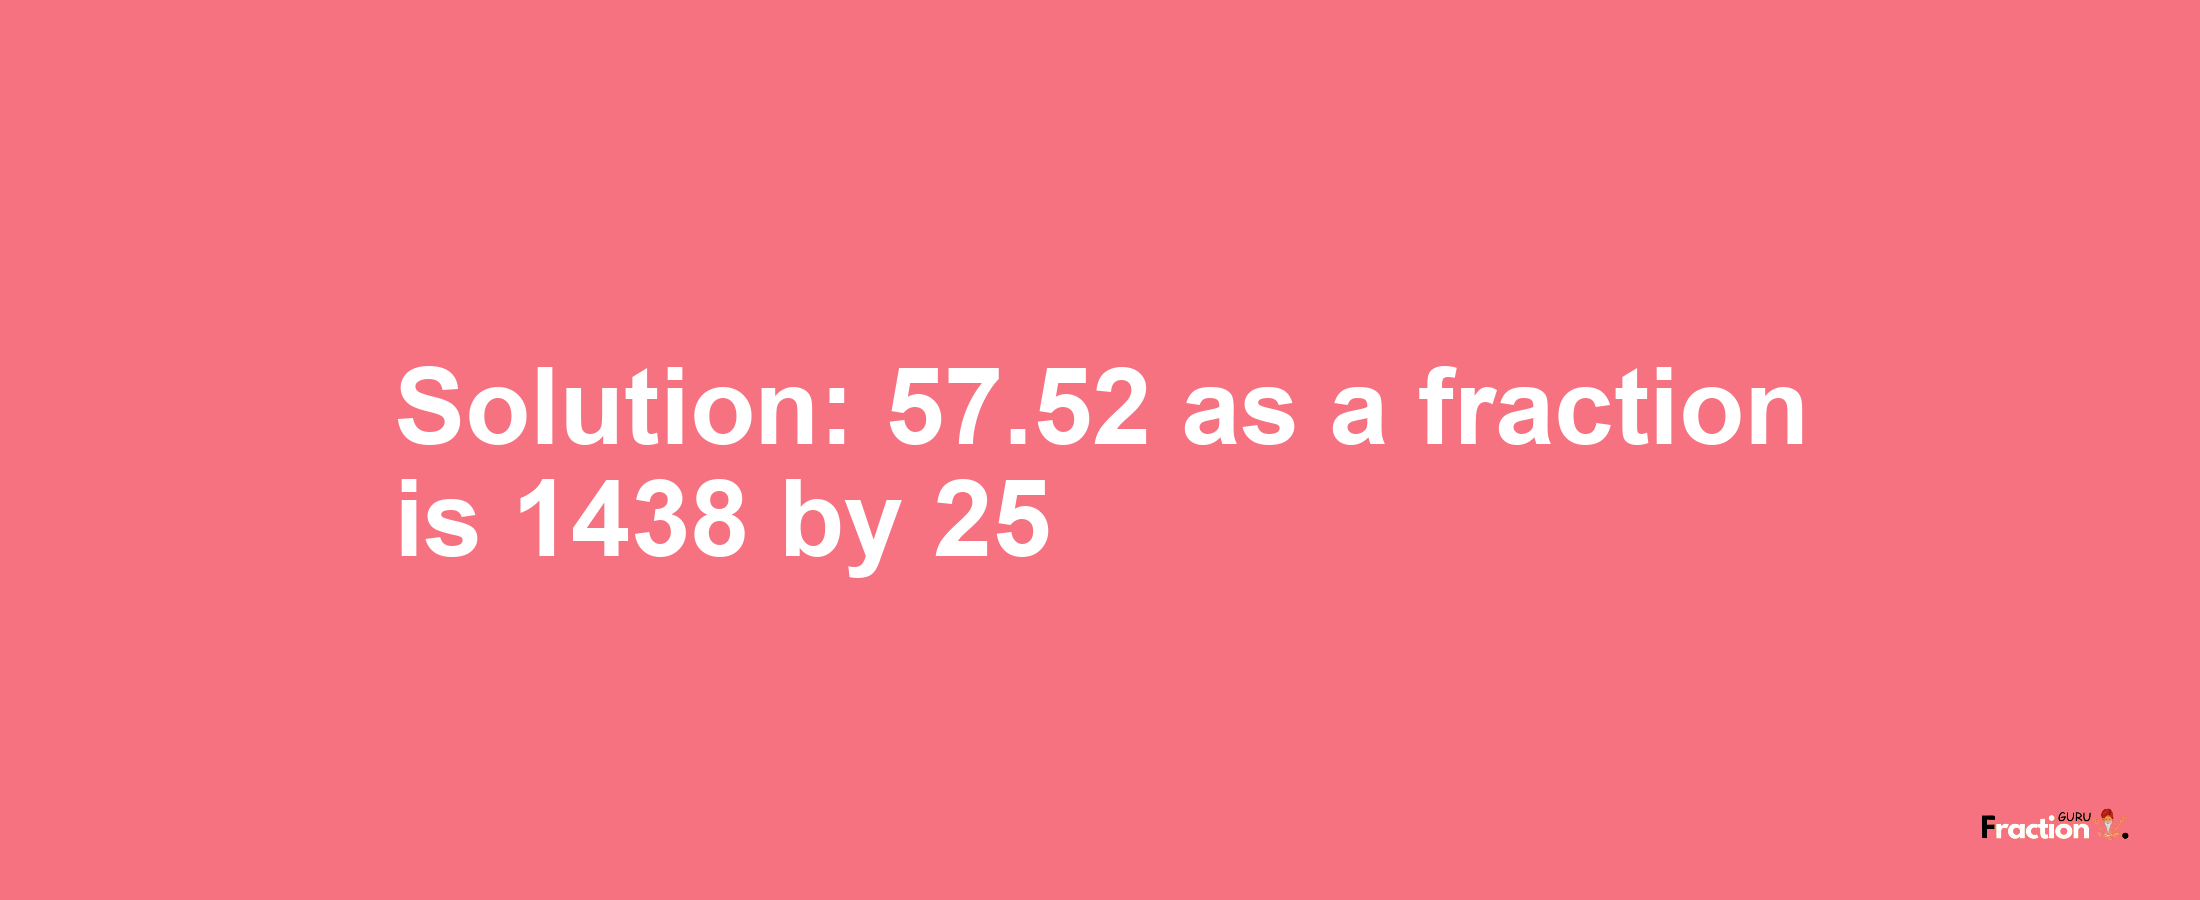 Solution:57.52 as a fraction is 1438/25